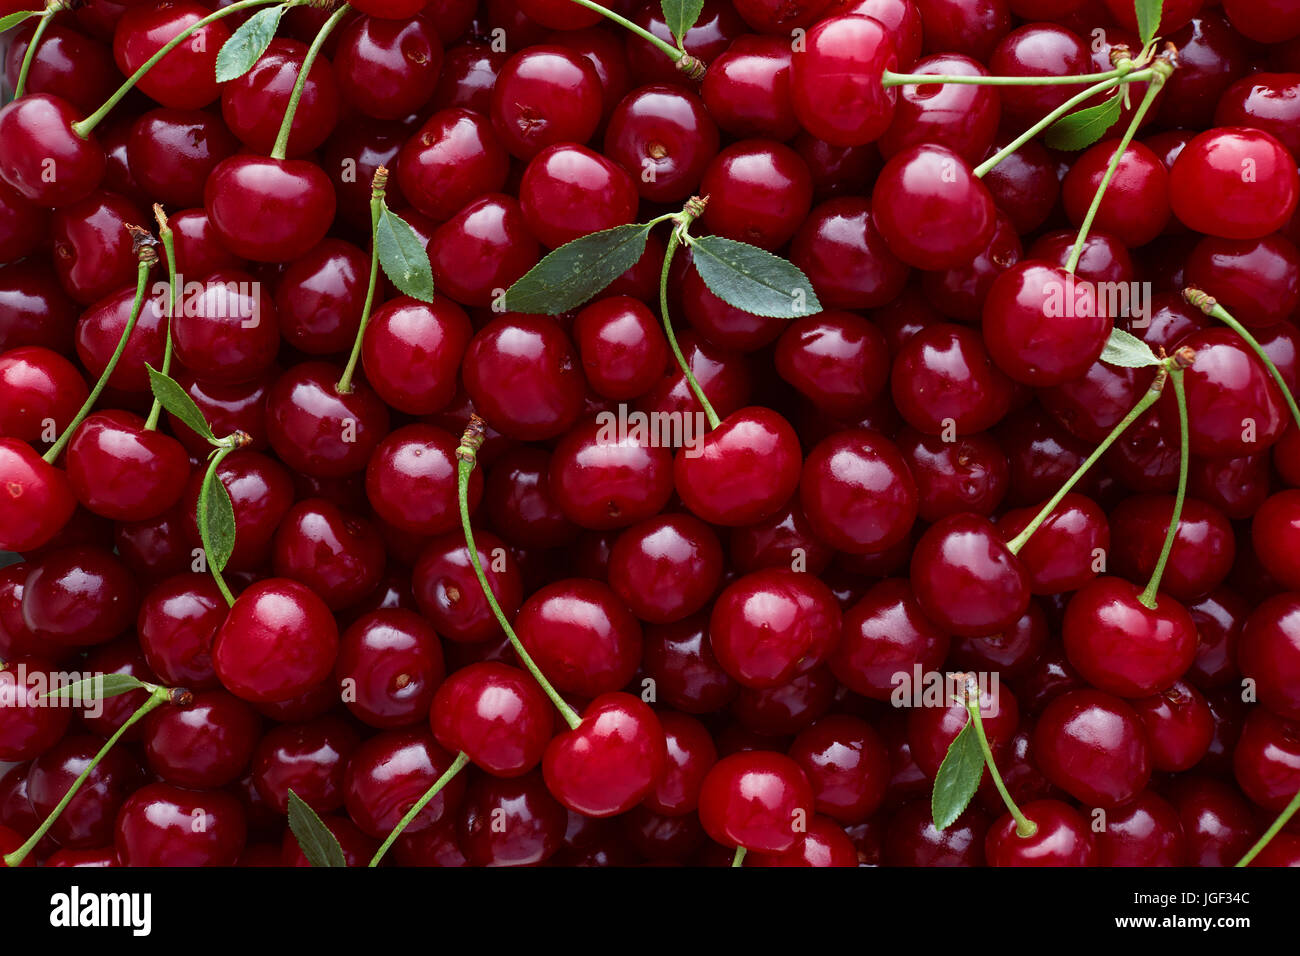 Close Up Of Pile Of Ripe Cherries With Stalks And Leaves Large